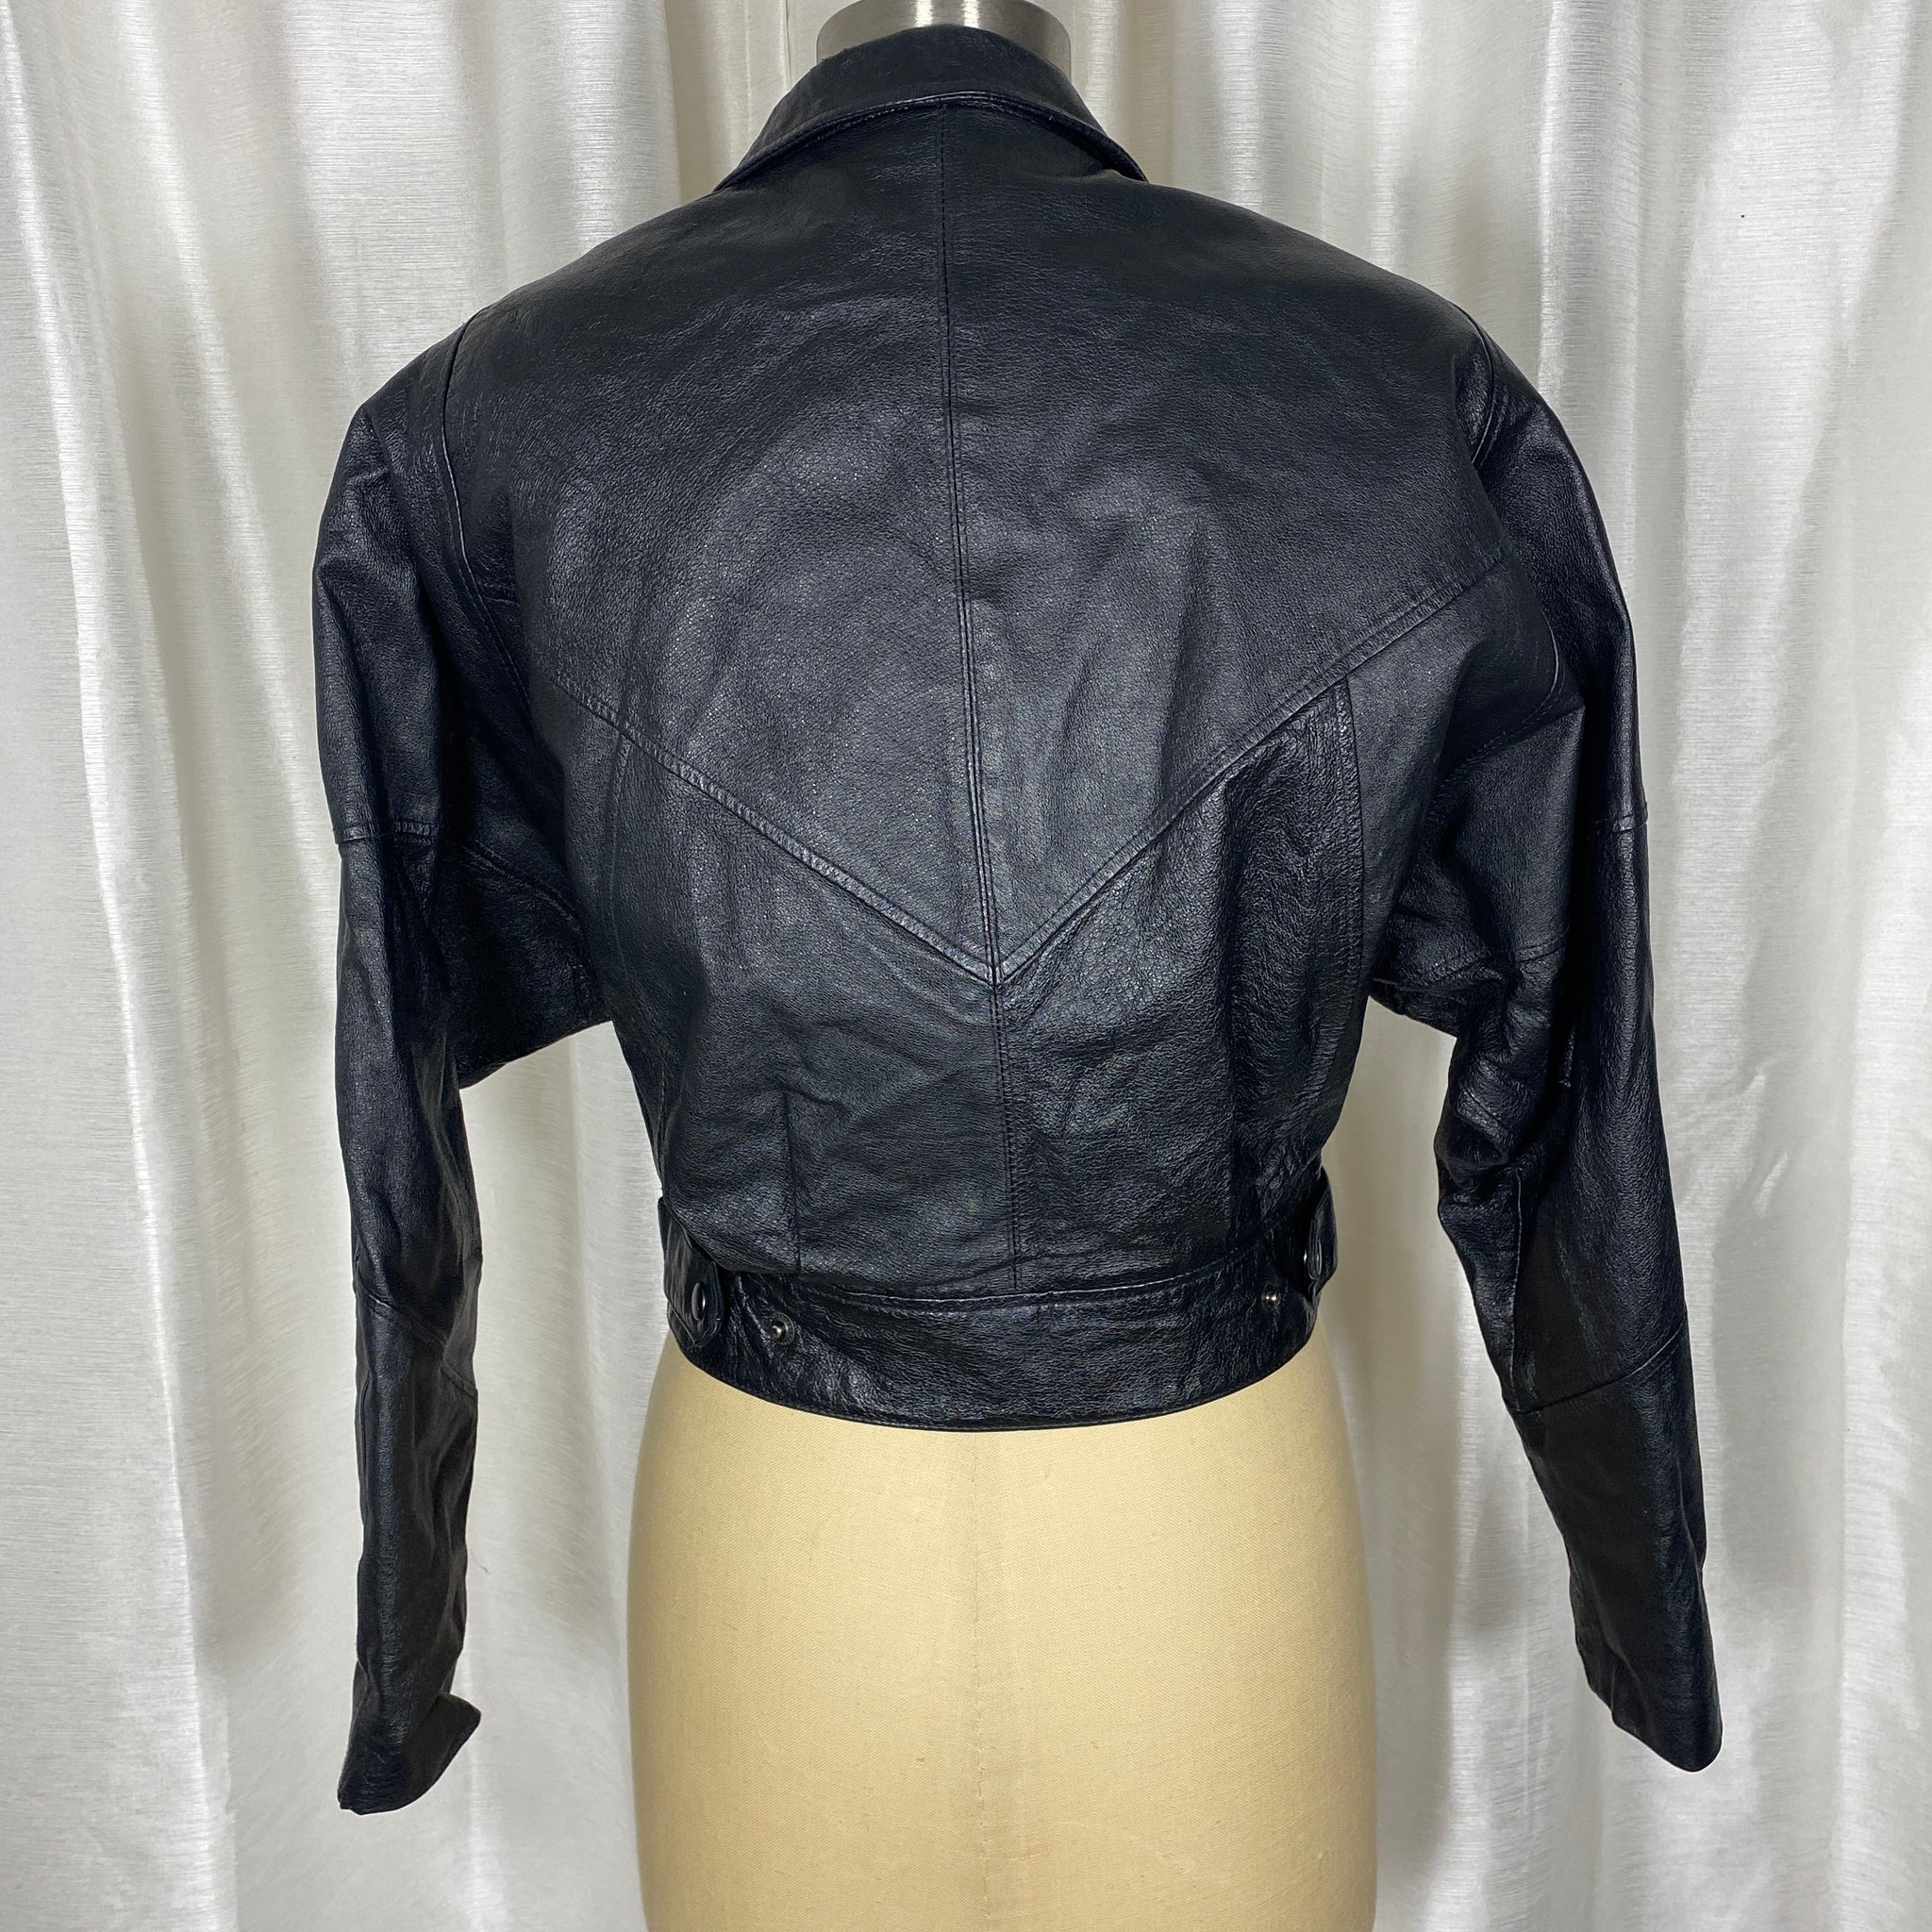 Jay Jacobs Vintage Cropped Leather Jacket - S/M